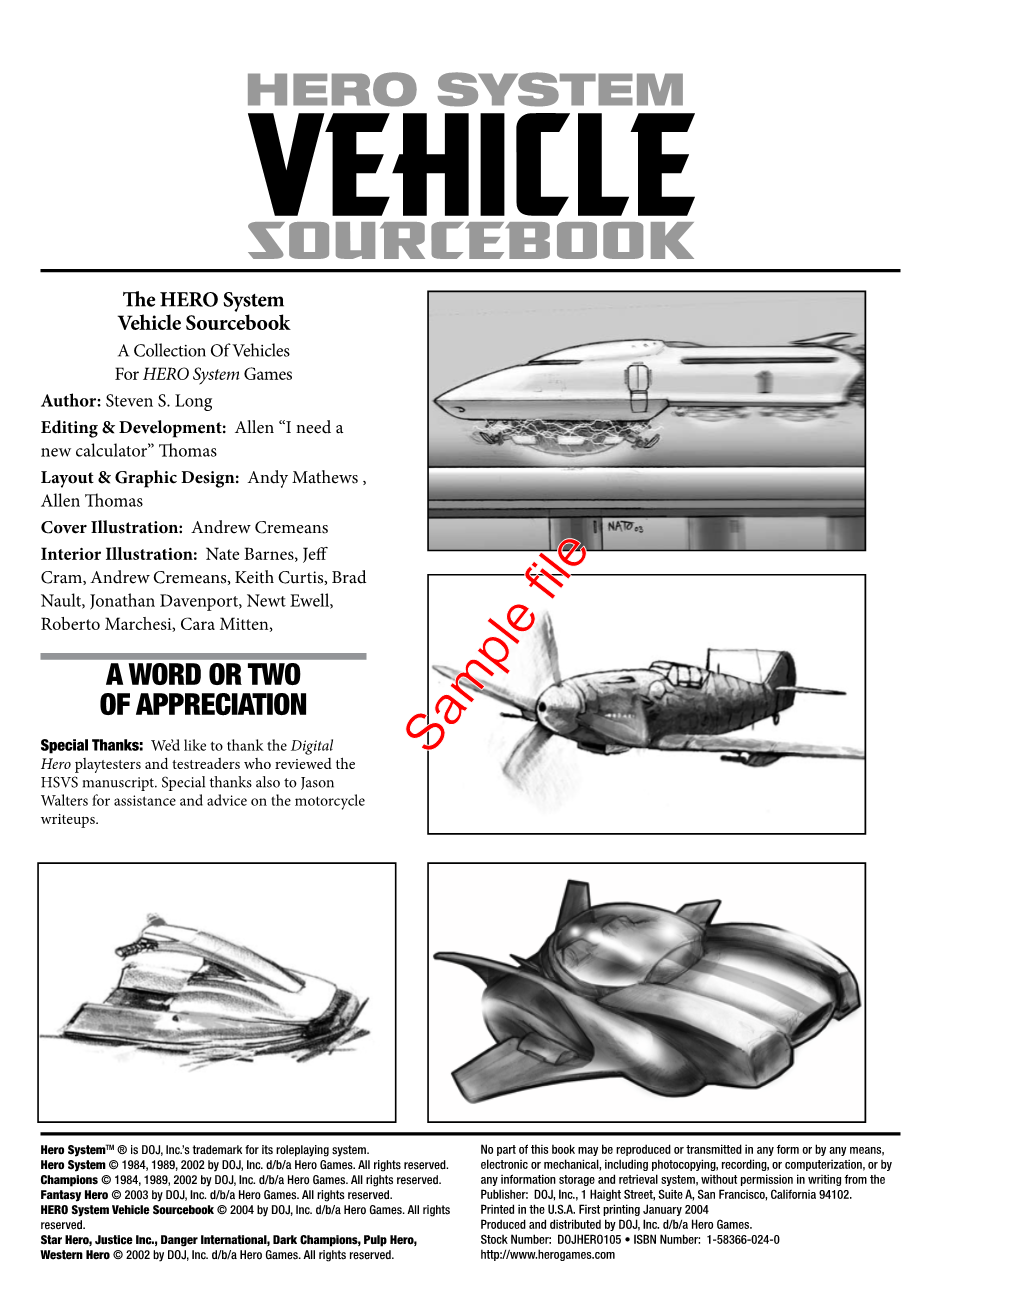 HERO System Vehicle Sourcebook a Collection of Vehicles for HERO System Games Author: Steven S